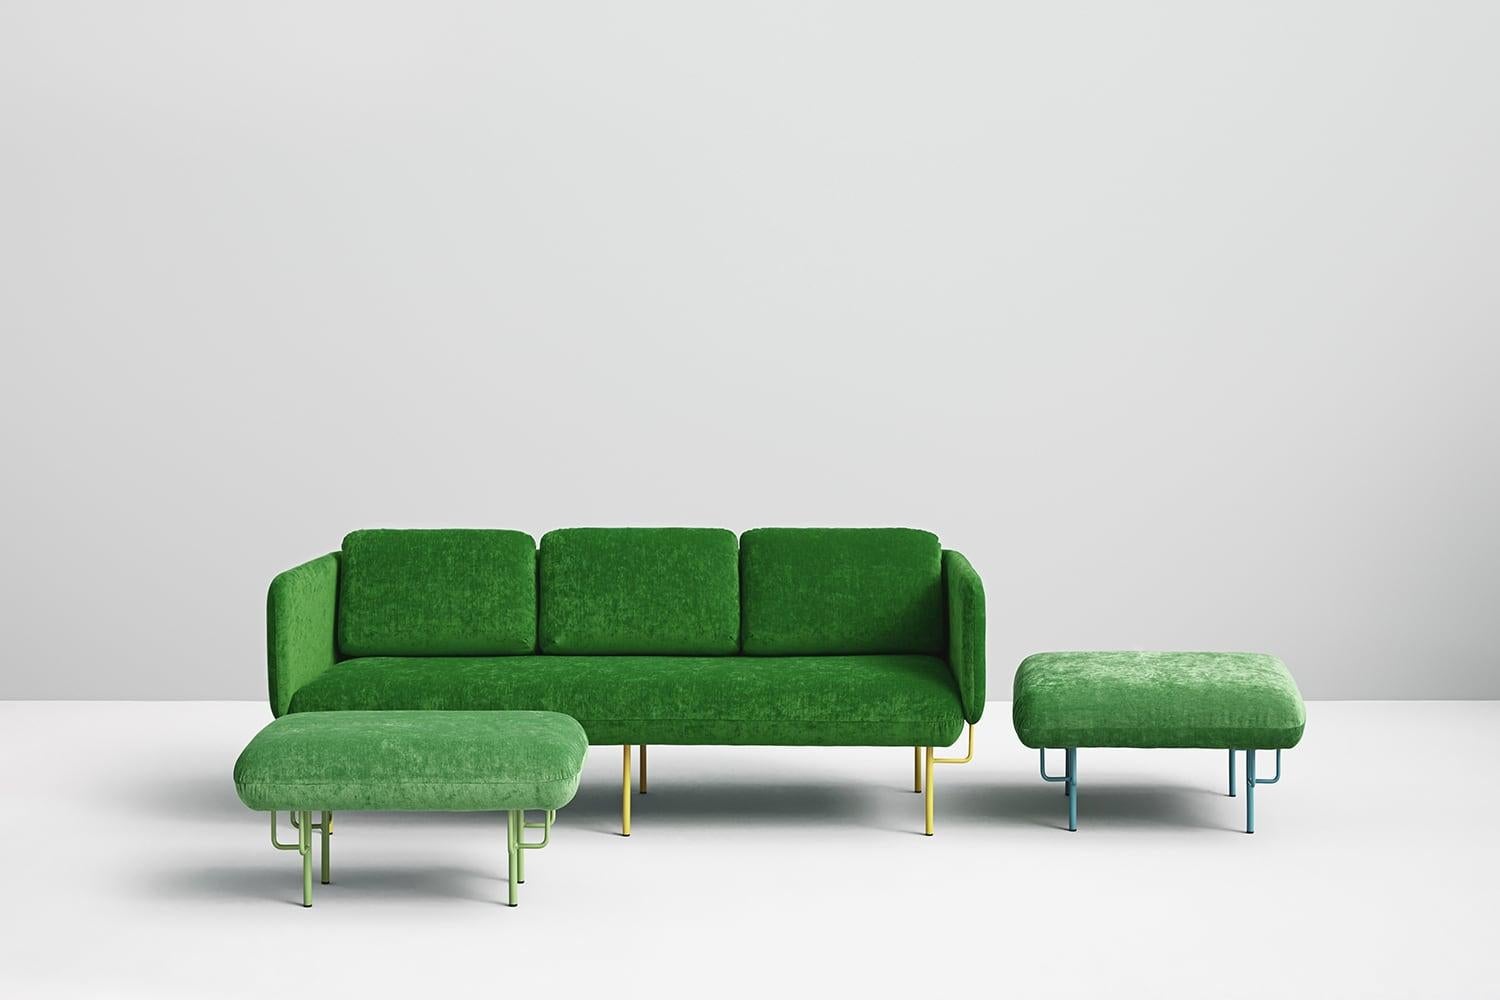 A set of large green Alce sofa and 2 large ottomans by Chris Hardy
Dimensions: W200, D88, H82, Seat45 (3 Seaters Sofa), W85, D85, H45 (Ottoman)
Materials: Iron structure and MDF board
Painted or chromed legs
Foam CMHR (high resilience and flame